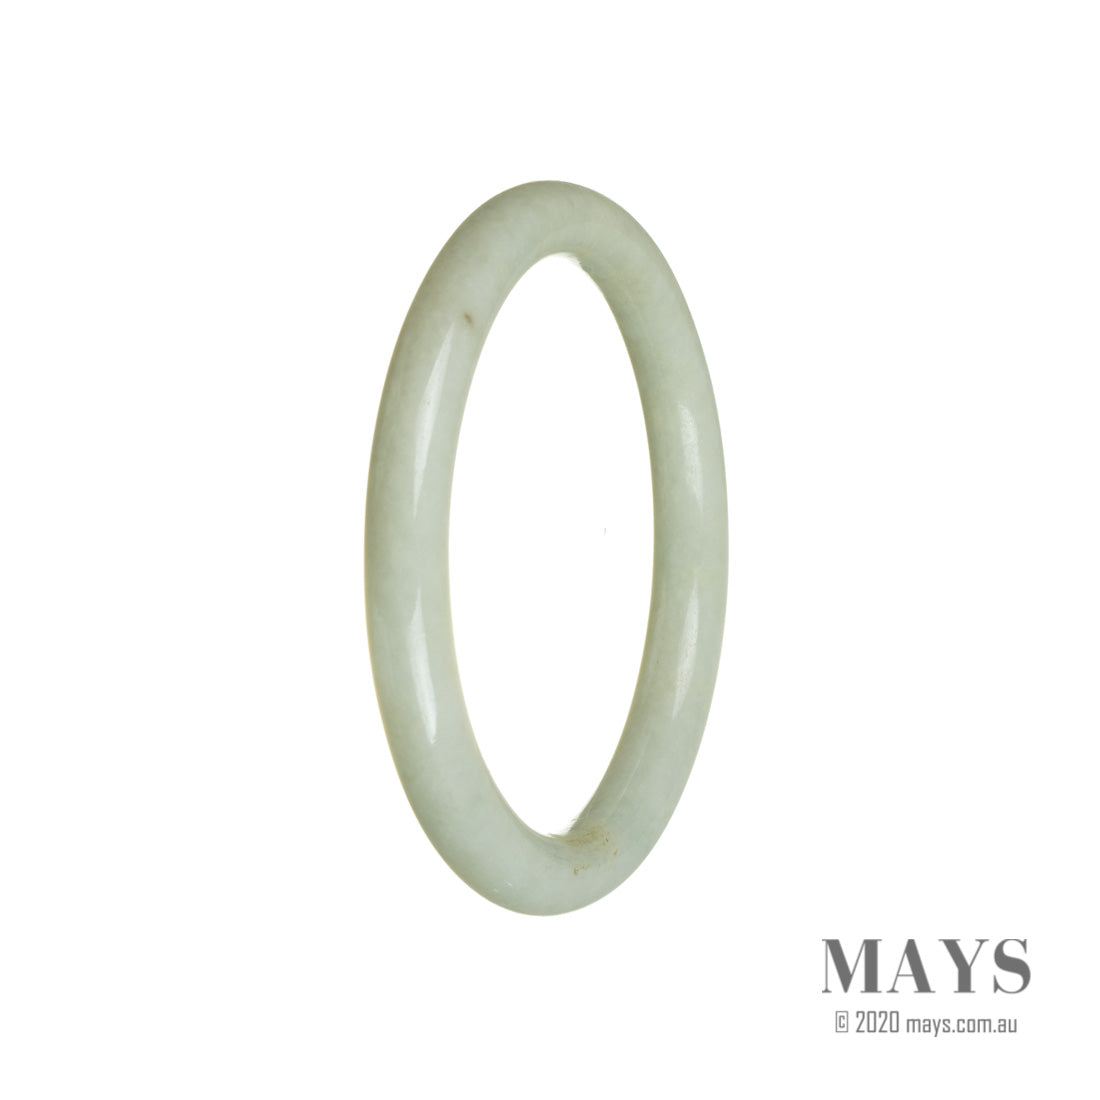 A pale green jade bangle bracelet, oval-shaped and 60mm in size, certified as Grade A quality. Manufactured by MAYS™.